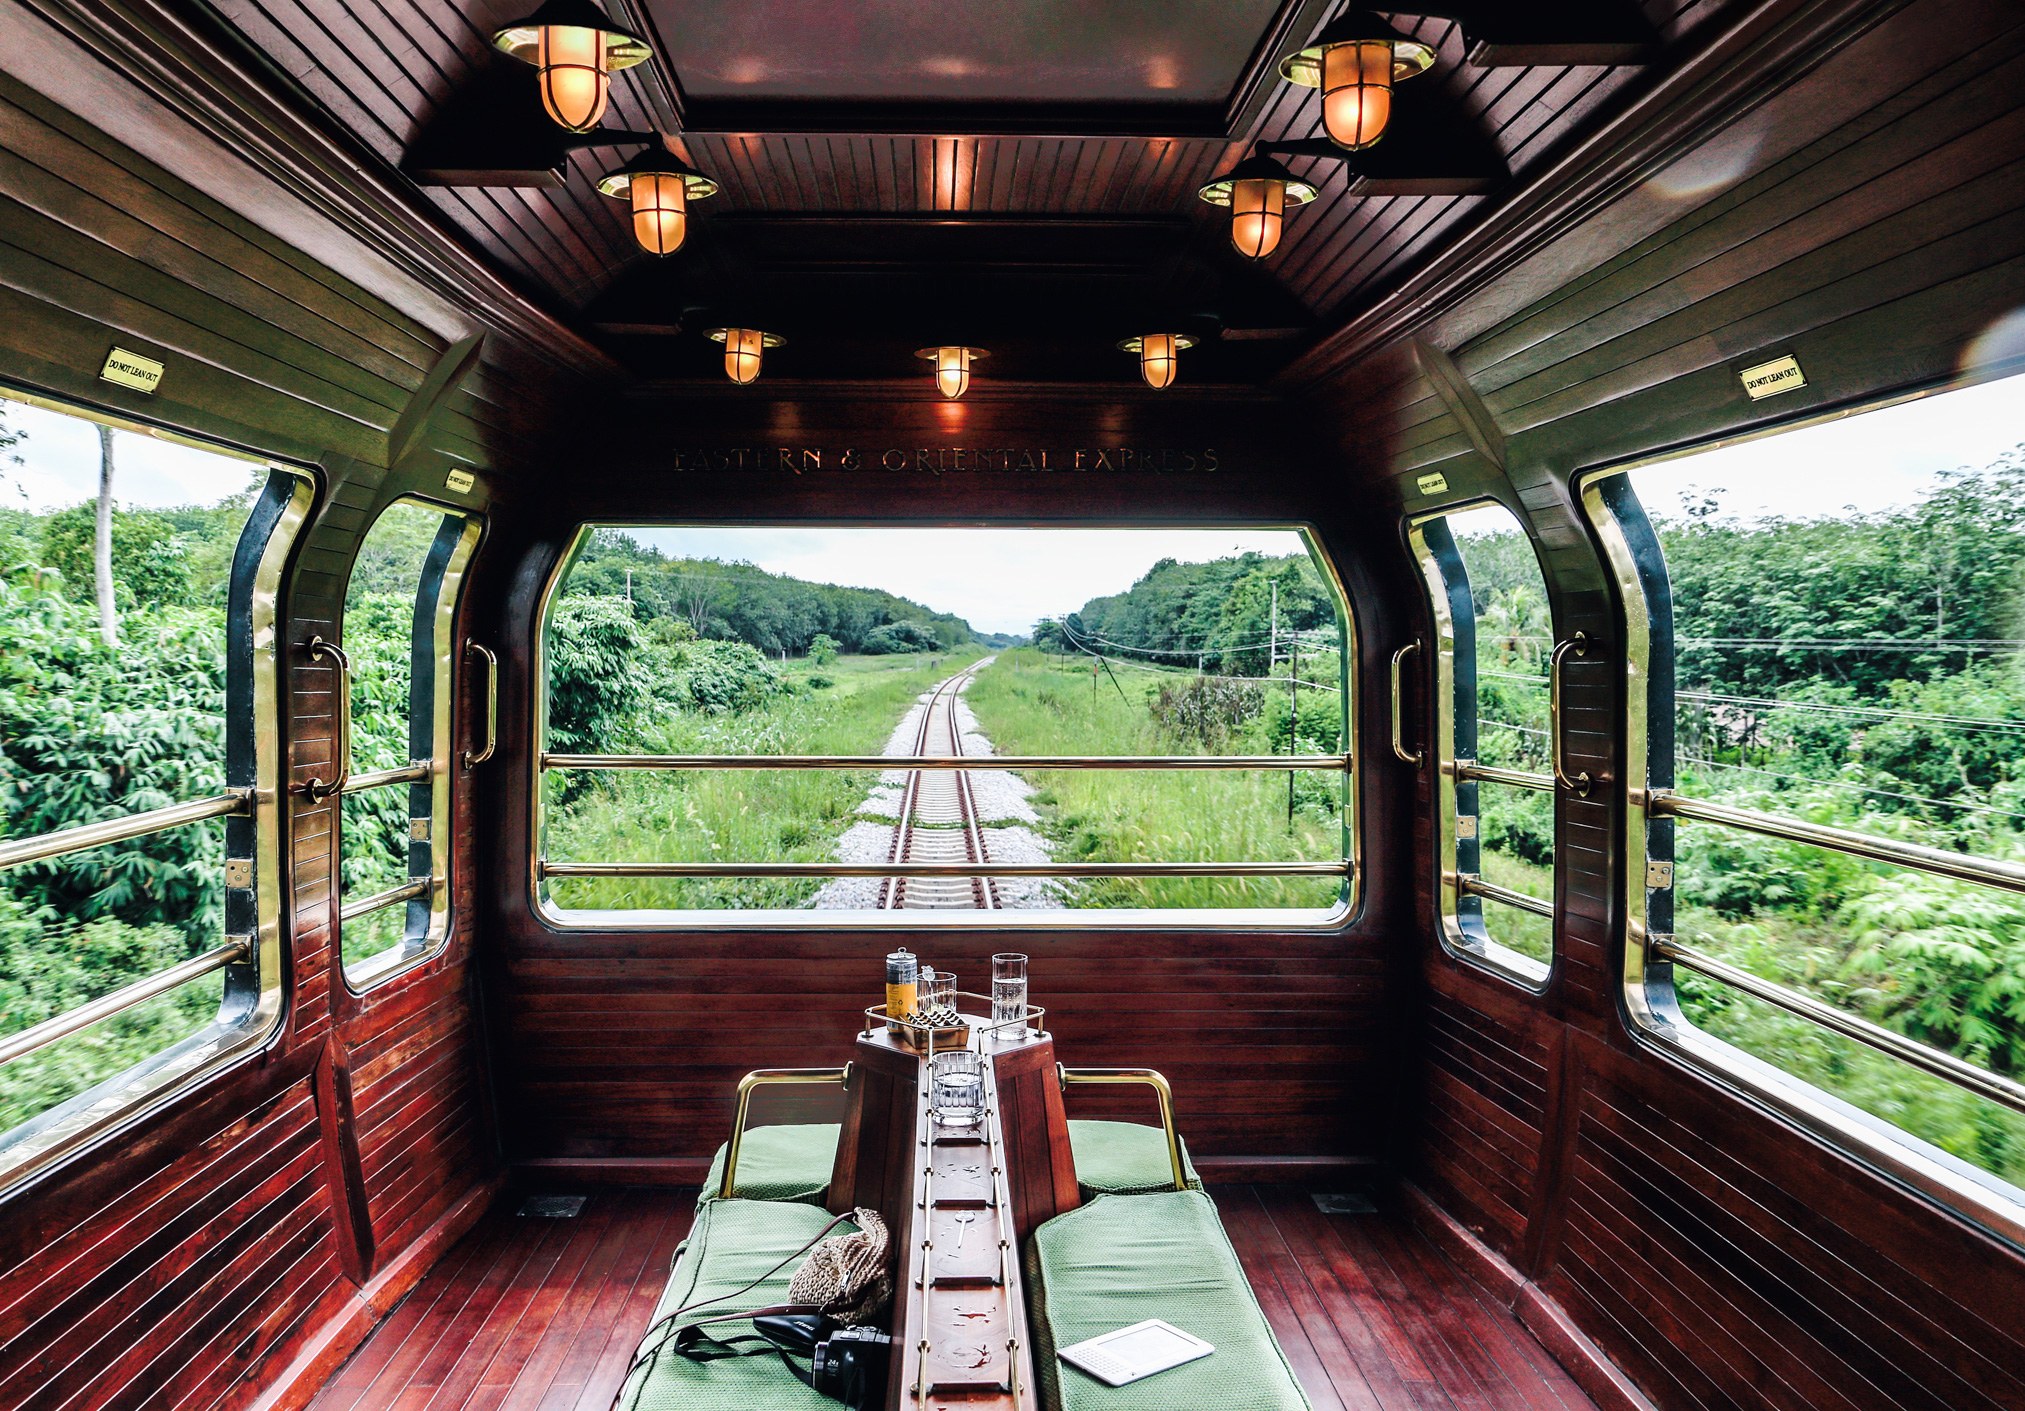 Chugging off: Now aboard the Eastern & Oriental Express for an exclusive  lunch experience